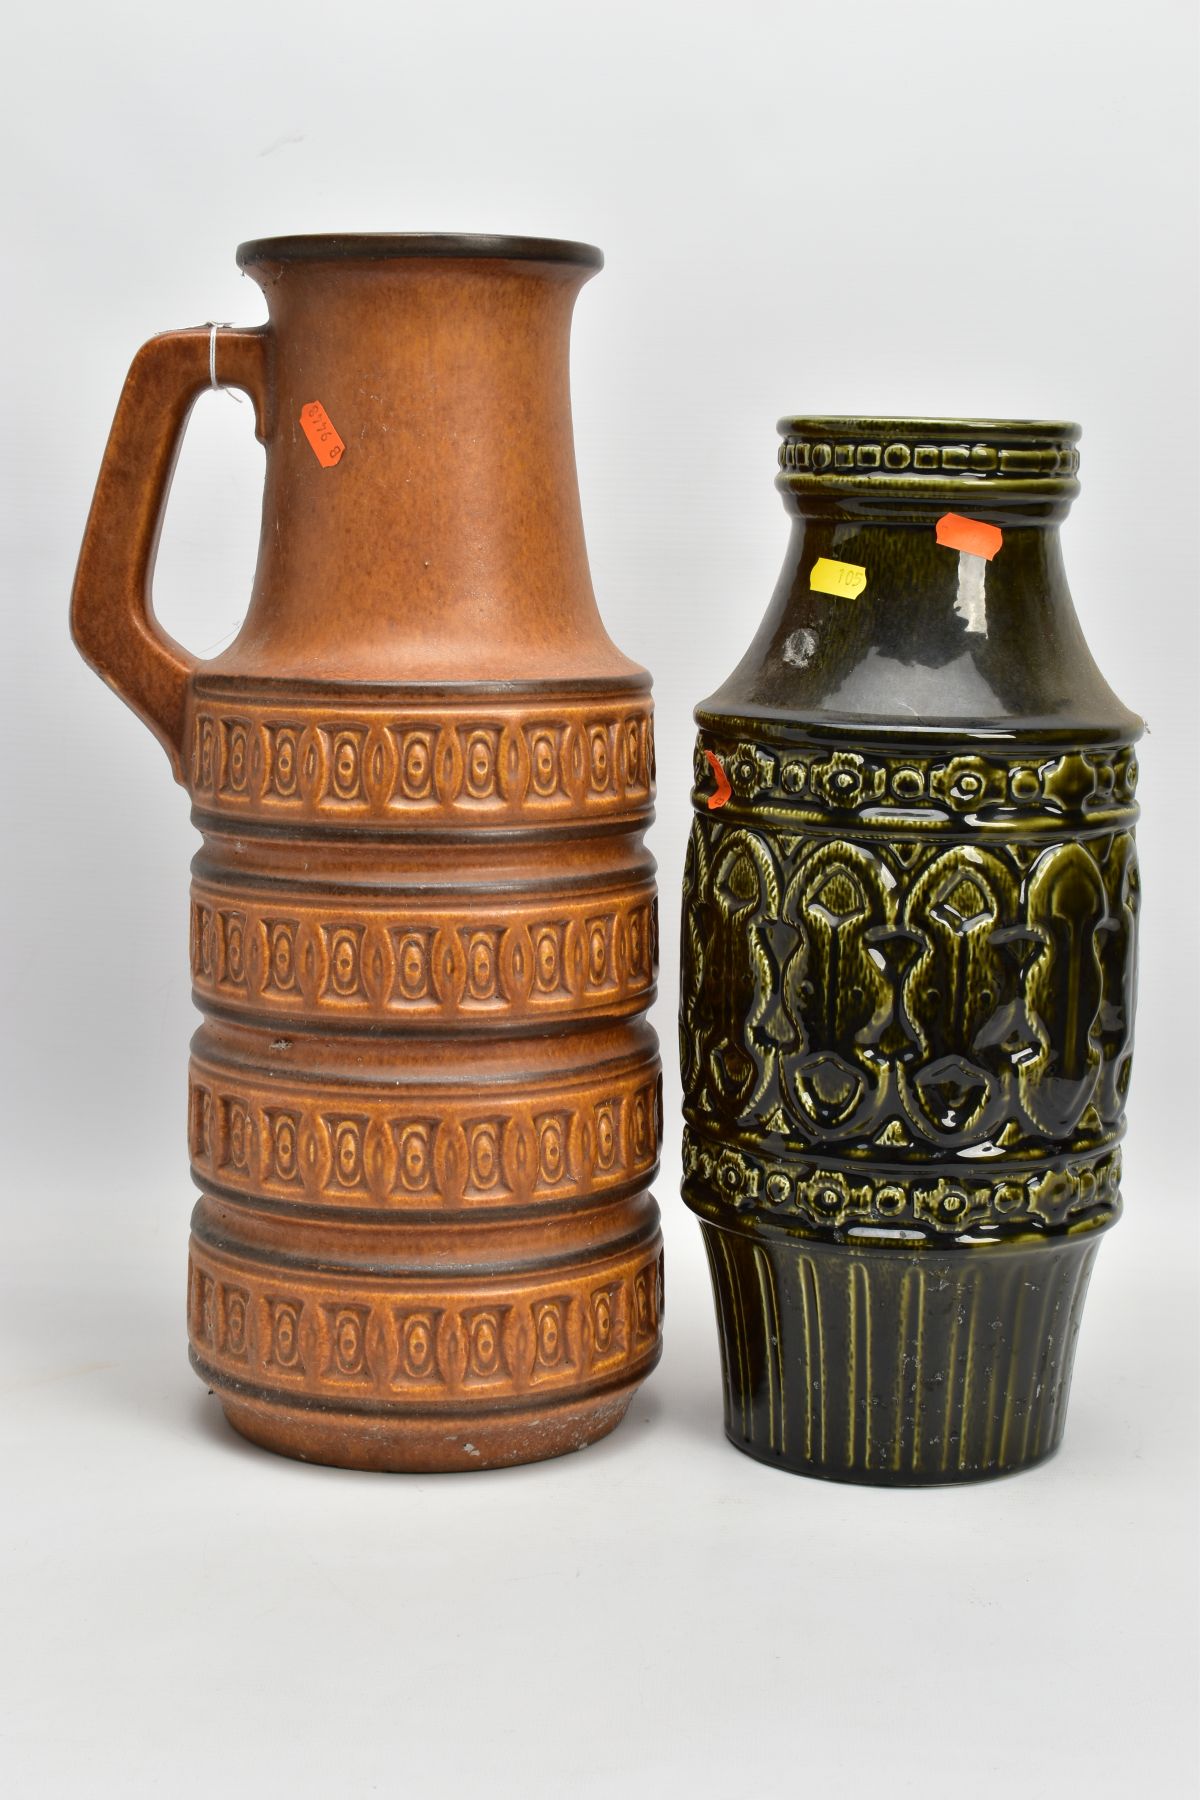 A WEST GERMAN POTTERY JUG WITH AN ART POTTERY VASE, the West German jug measuring 45cm high, being - Image 3 of 6